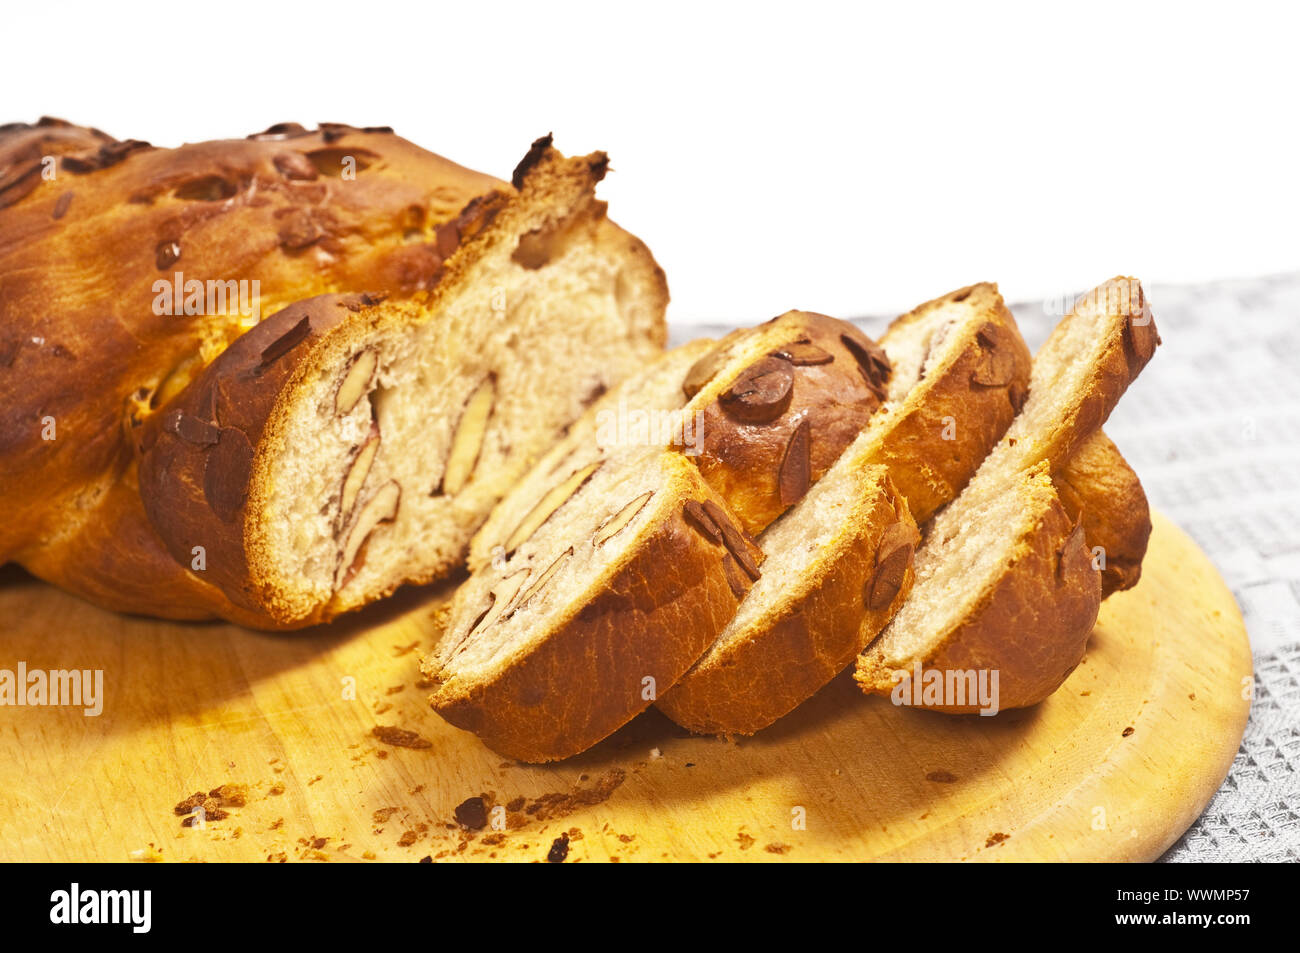 Yeast plait with nuts and raisins Stock Photo